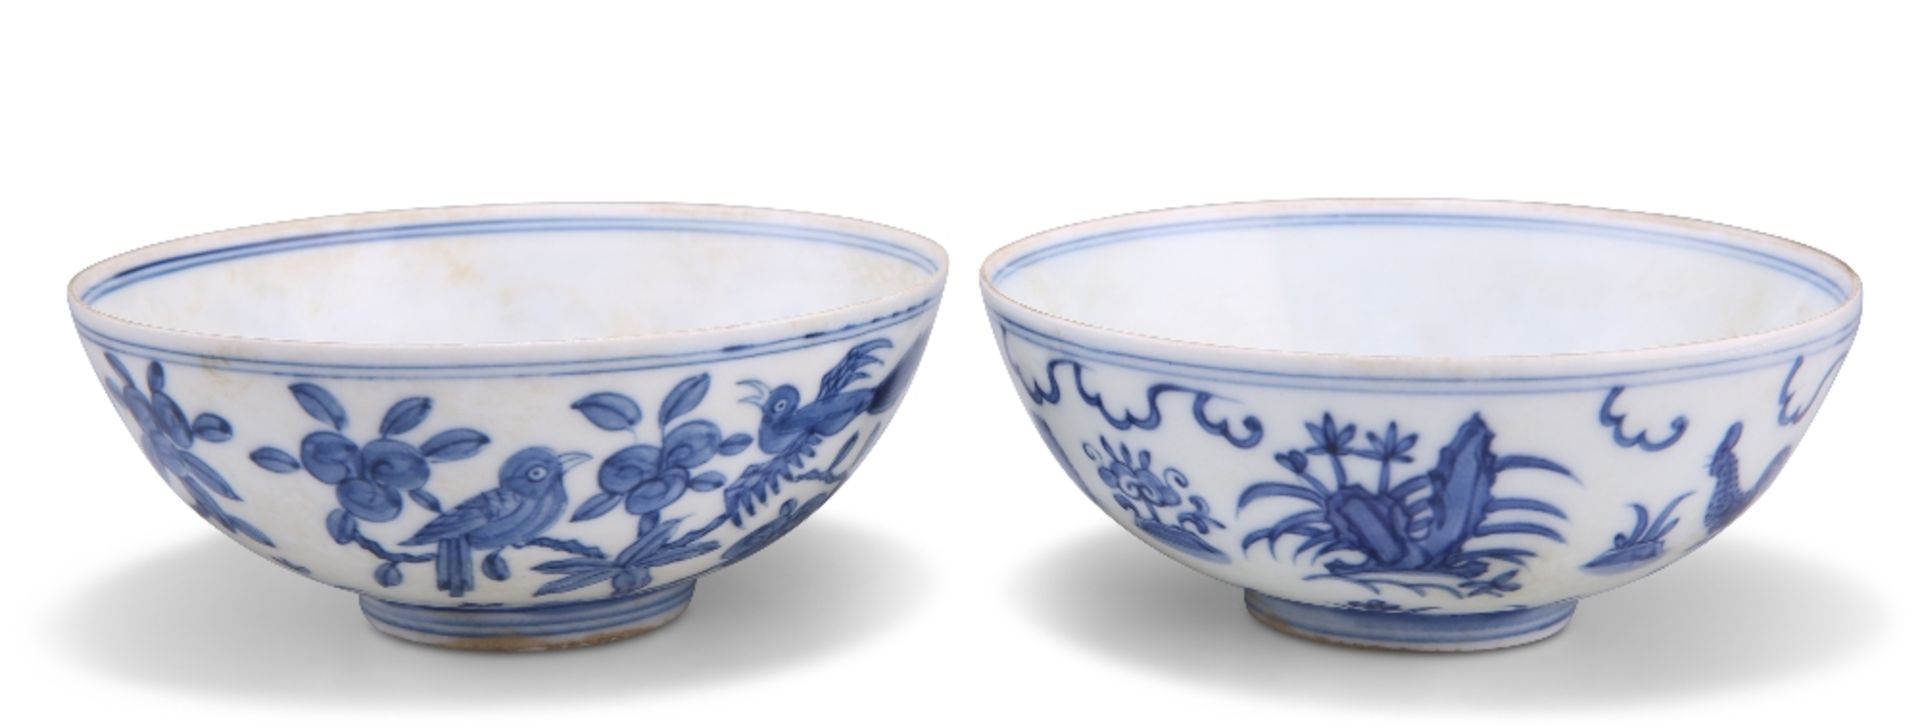 A NEAR PAIR OF CHINESE BLUE AND WHITE EGGSHELL BOWLS